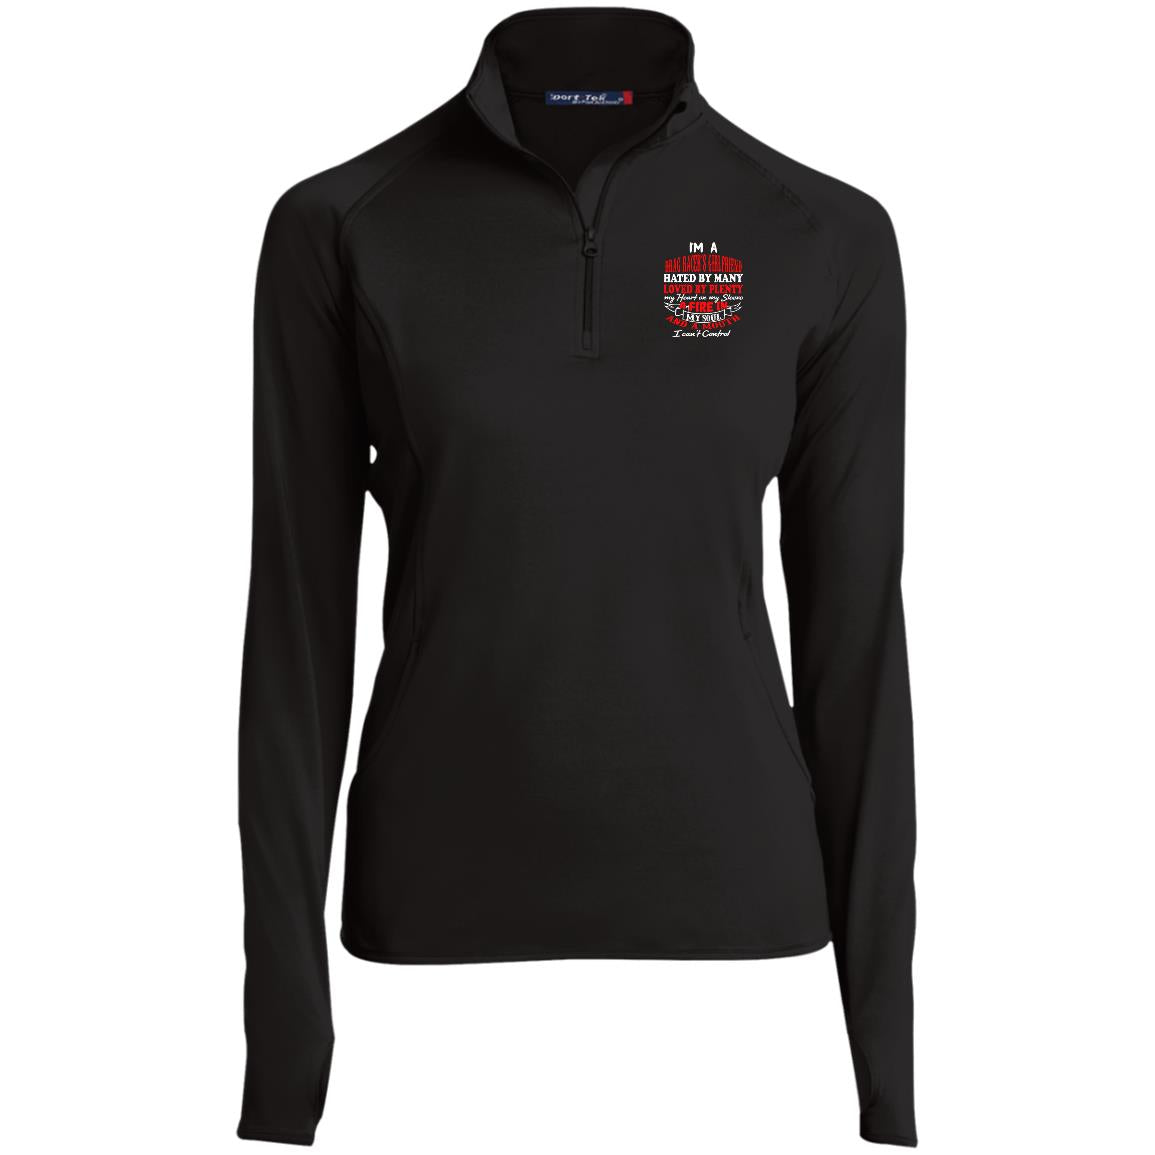 I'm A Drag Racer's Girlfriend Hated By Many Loved By Plenty Ladies' 1/2 Zip Performance Pullover